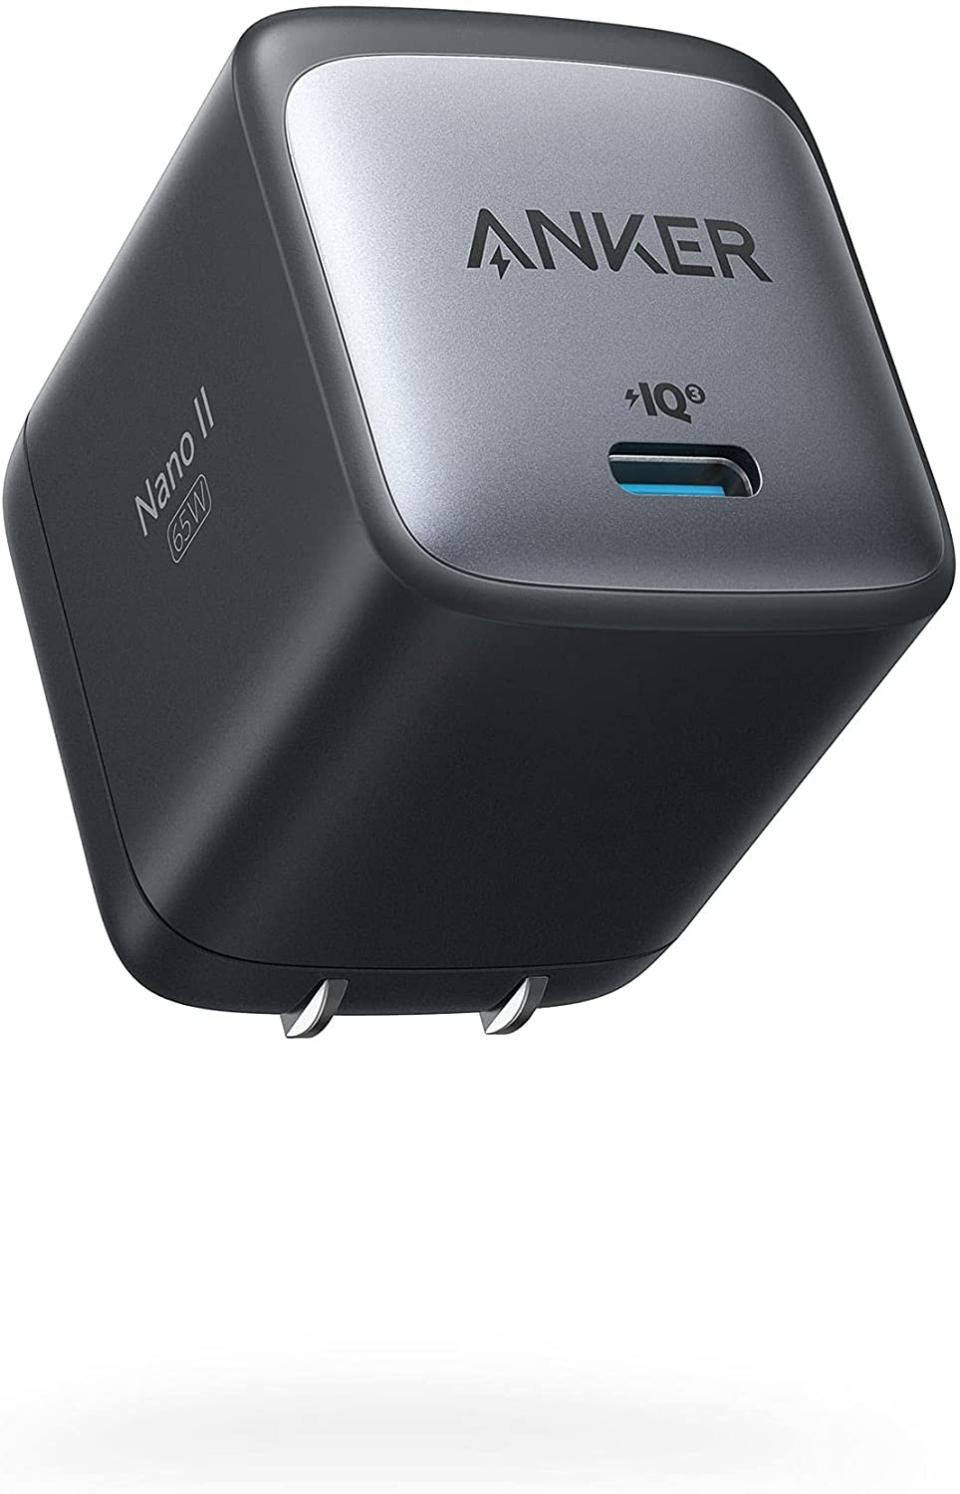 anker nano ii 65W laptop charger, best laptop chargers